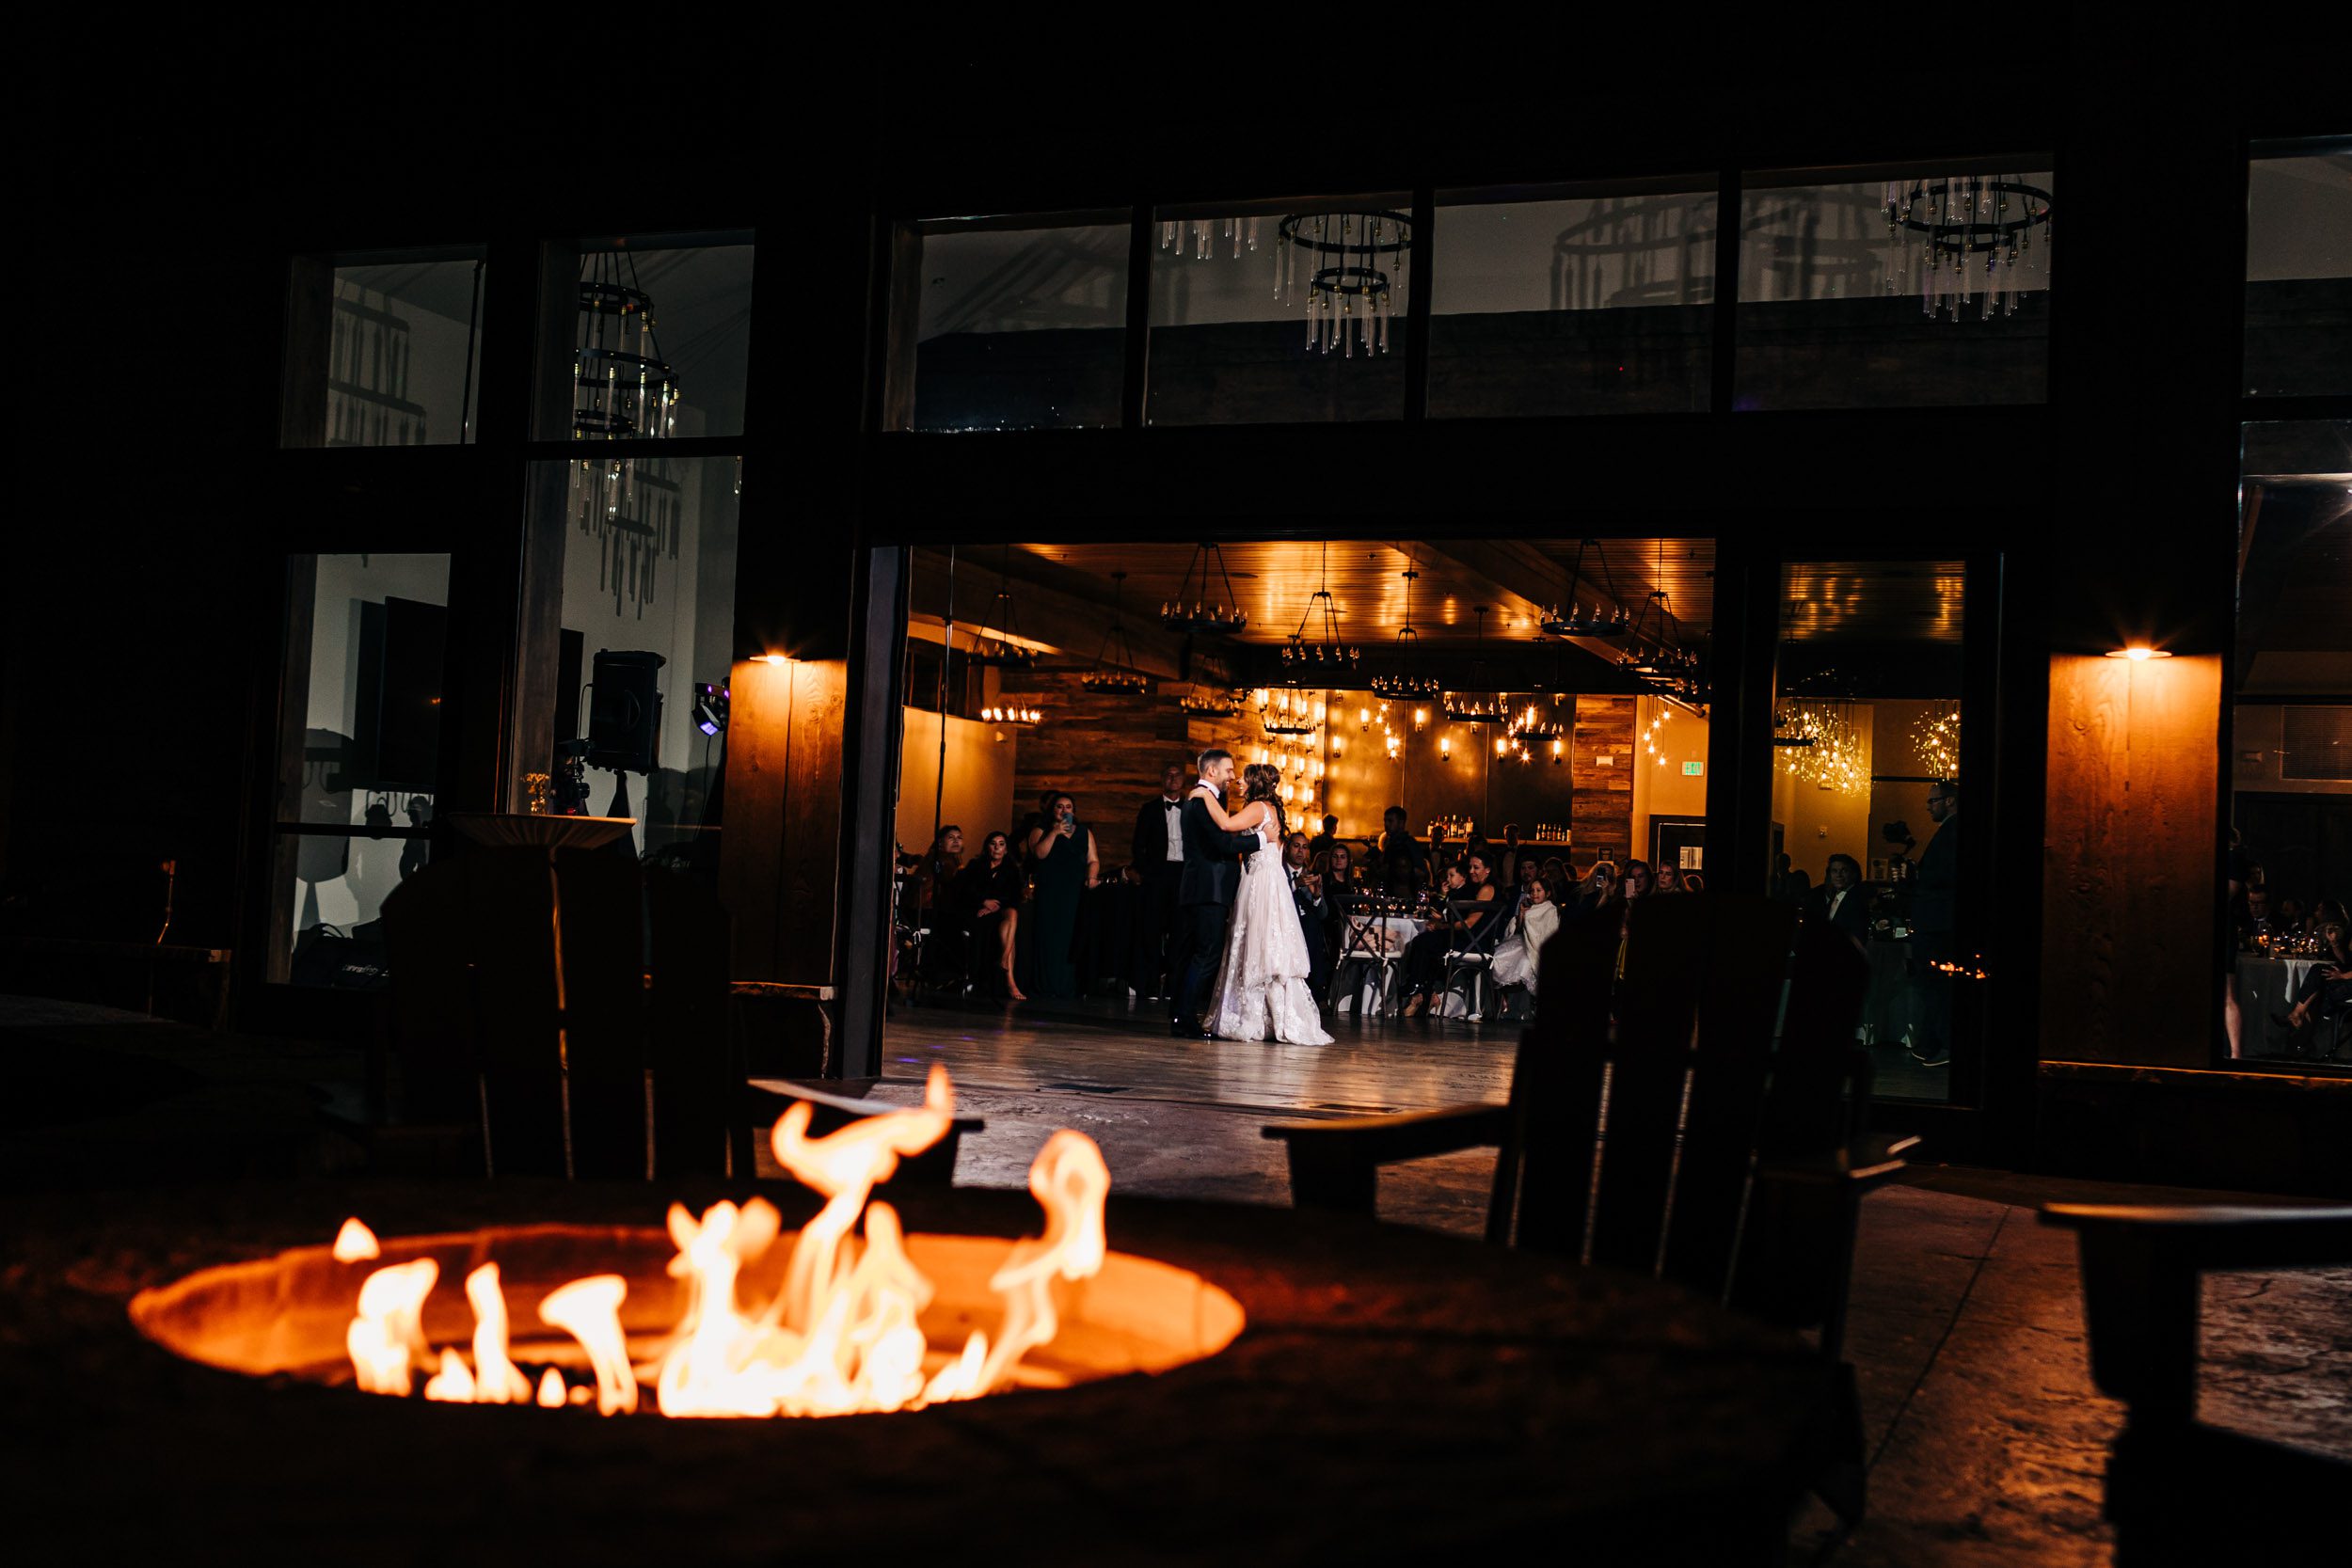 first dance taken from outside the venue by the fire